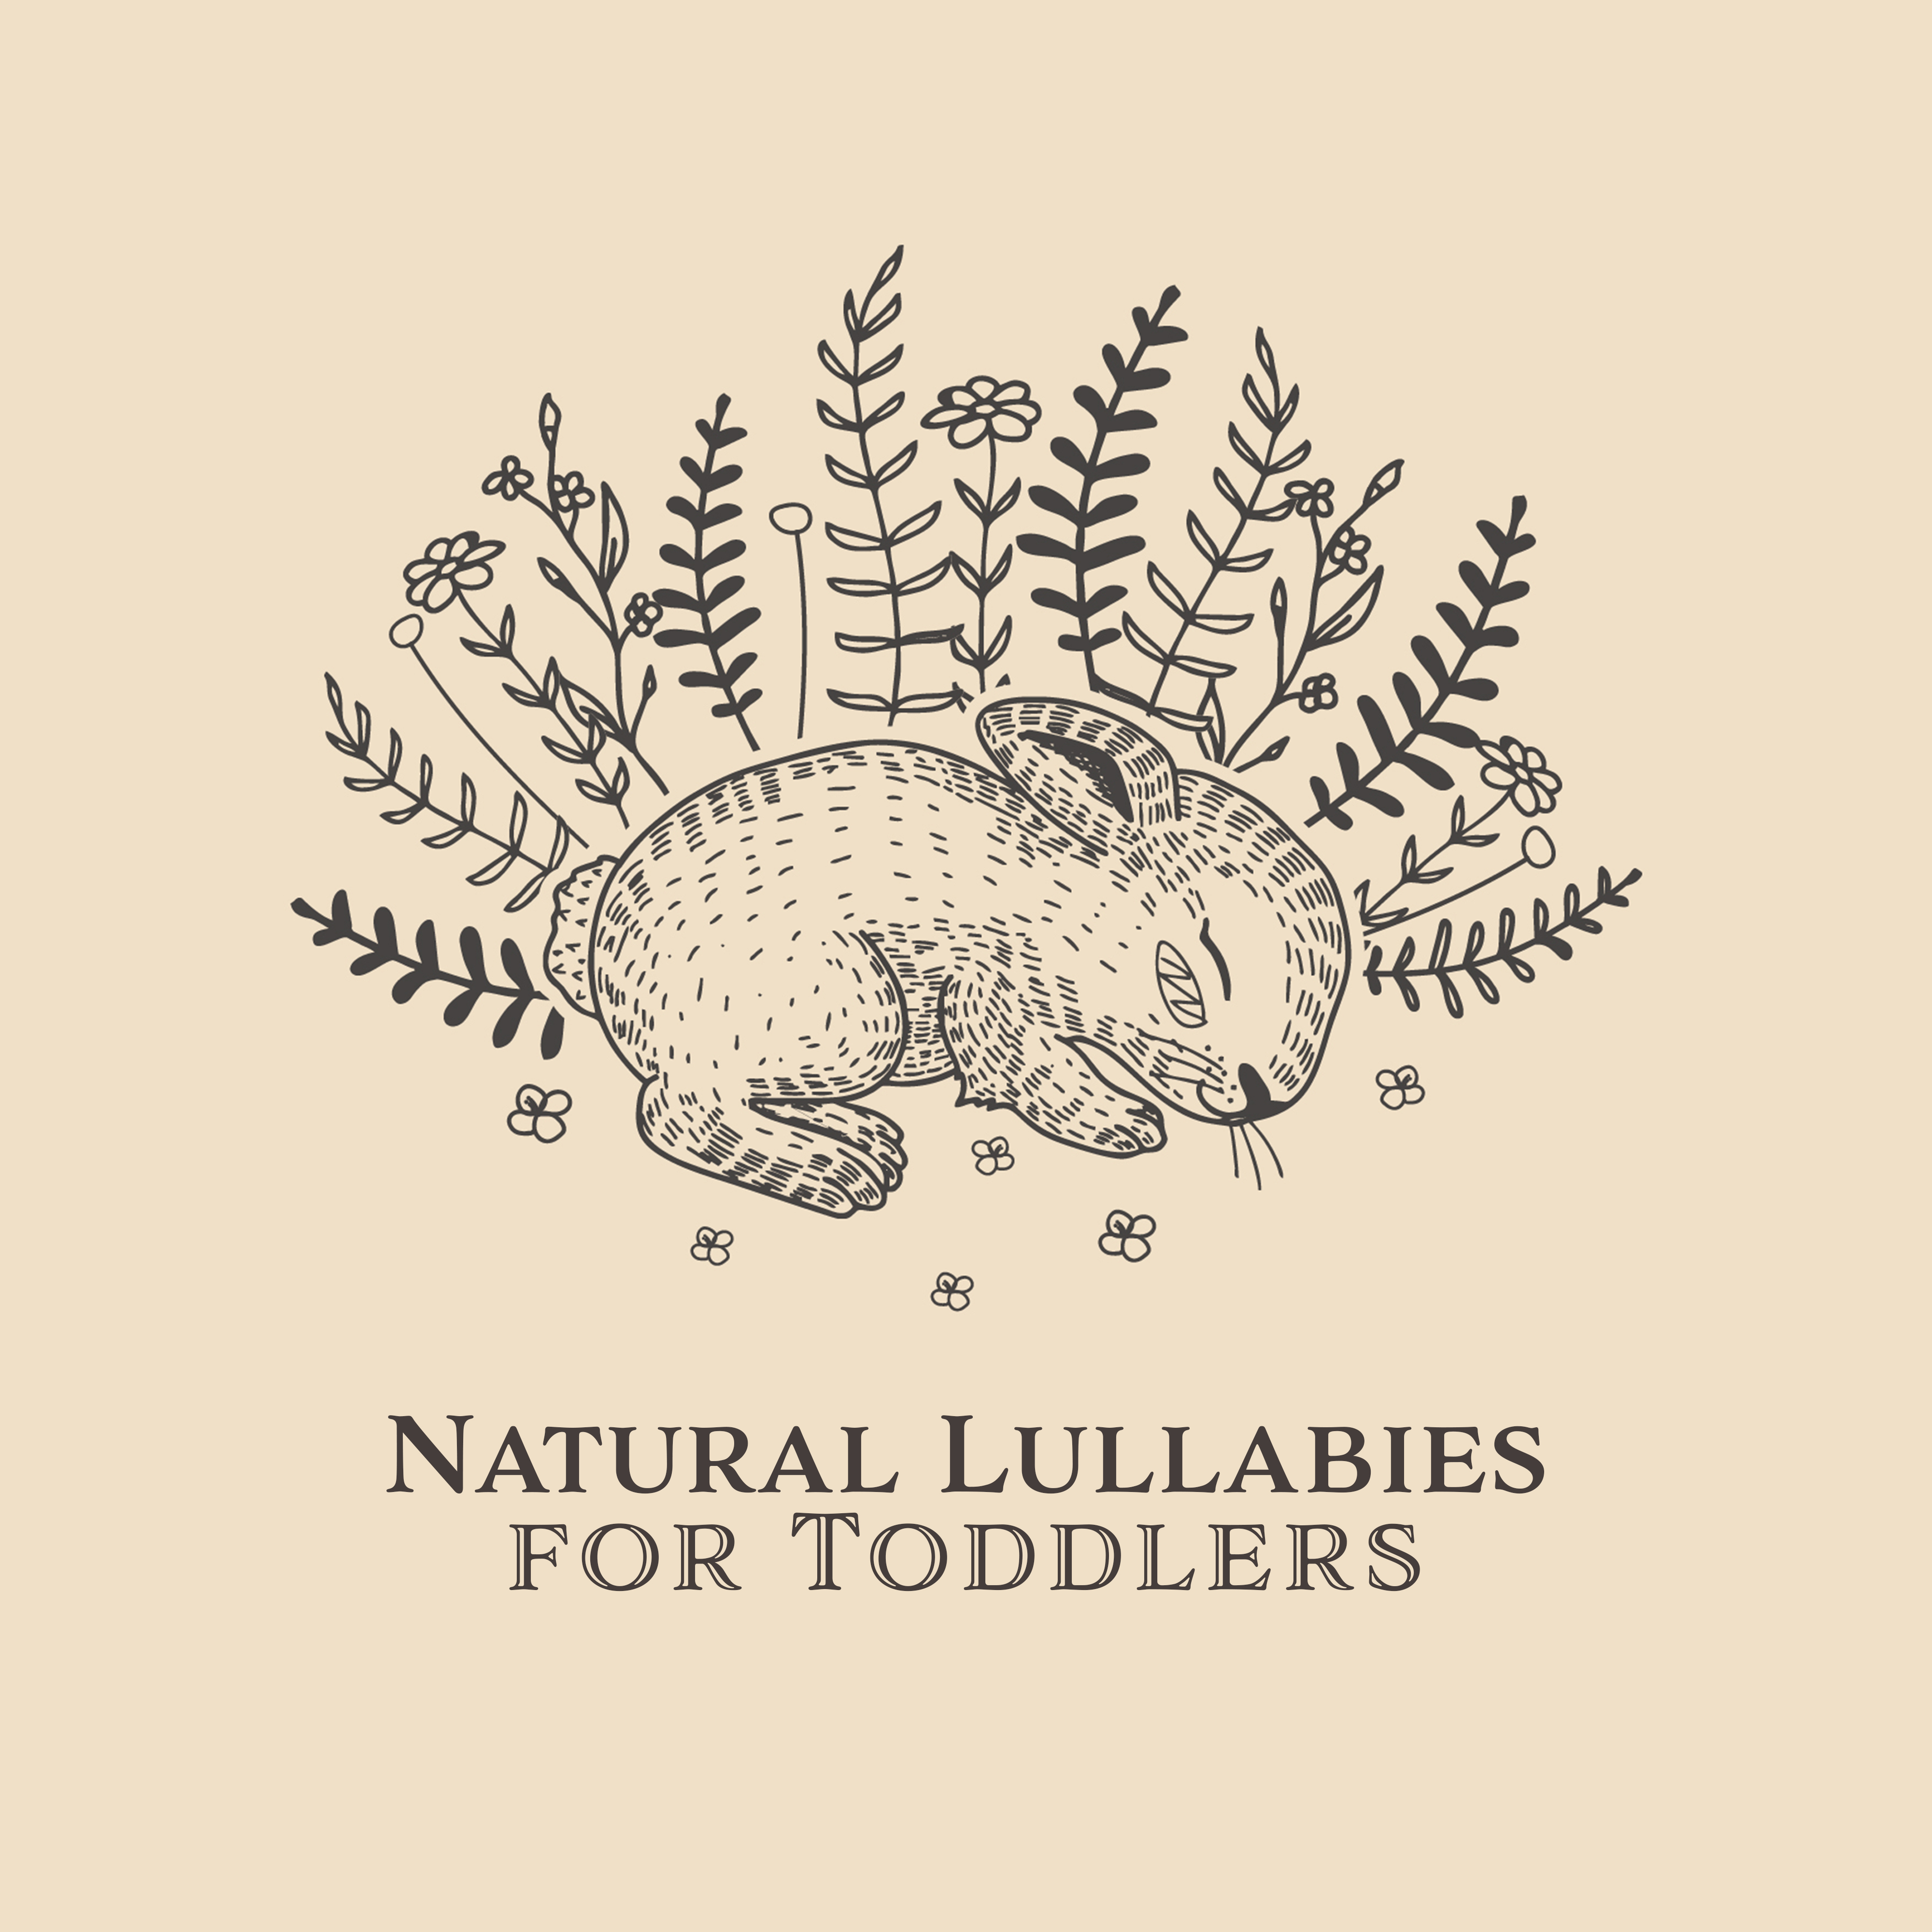 Natural Lullabies for Toddlers